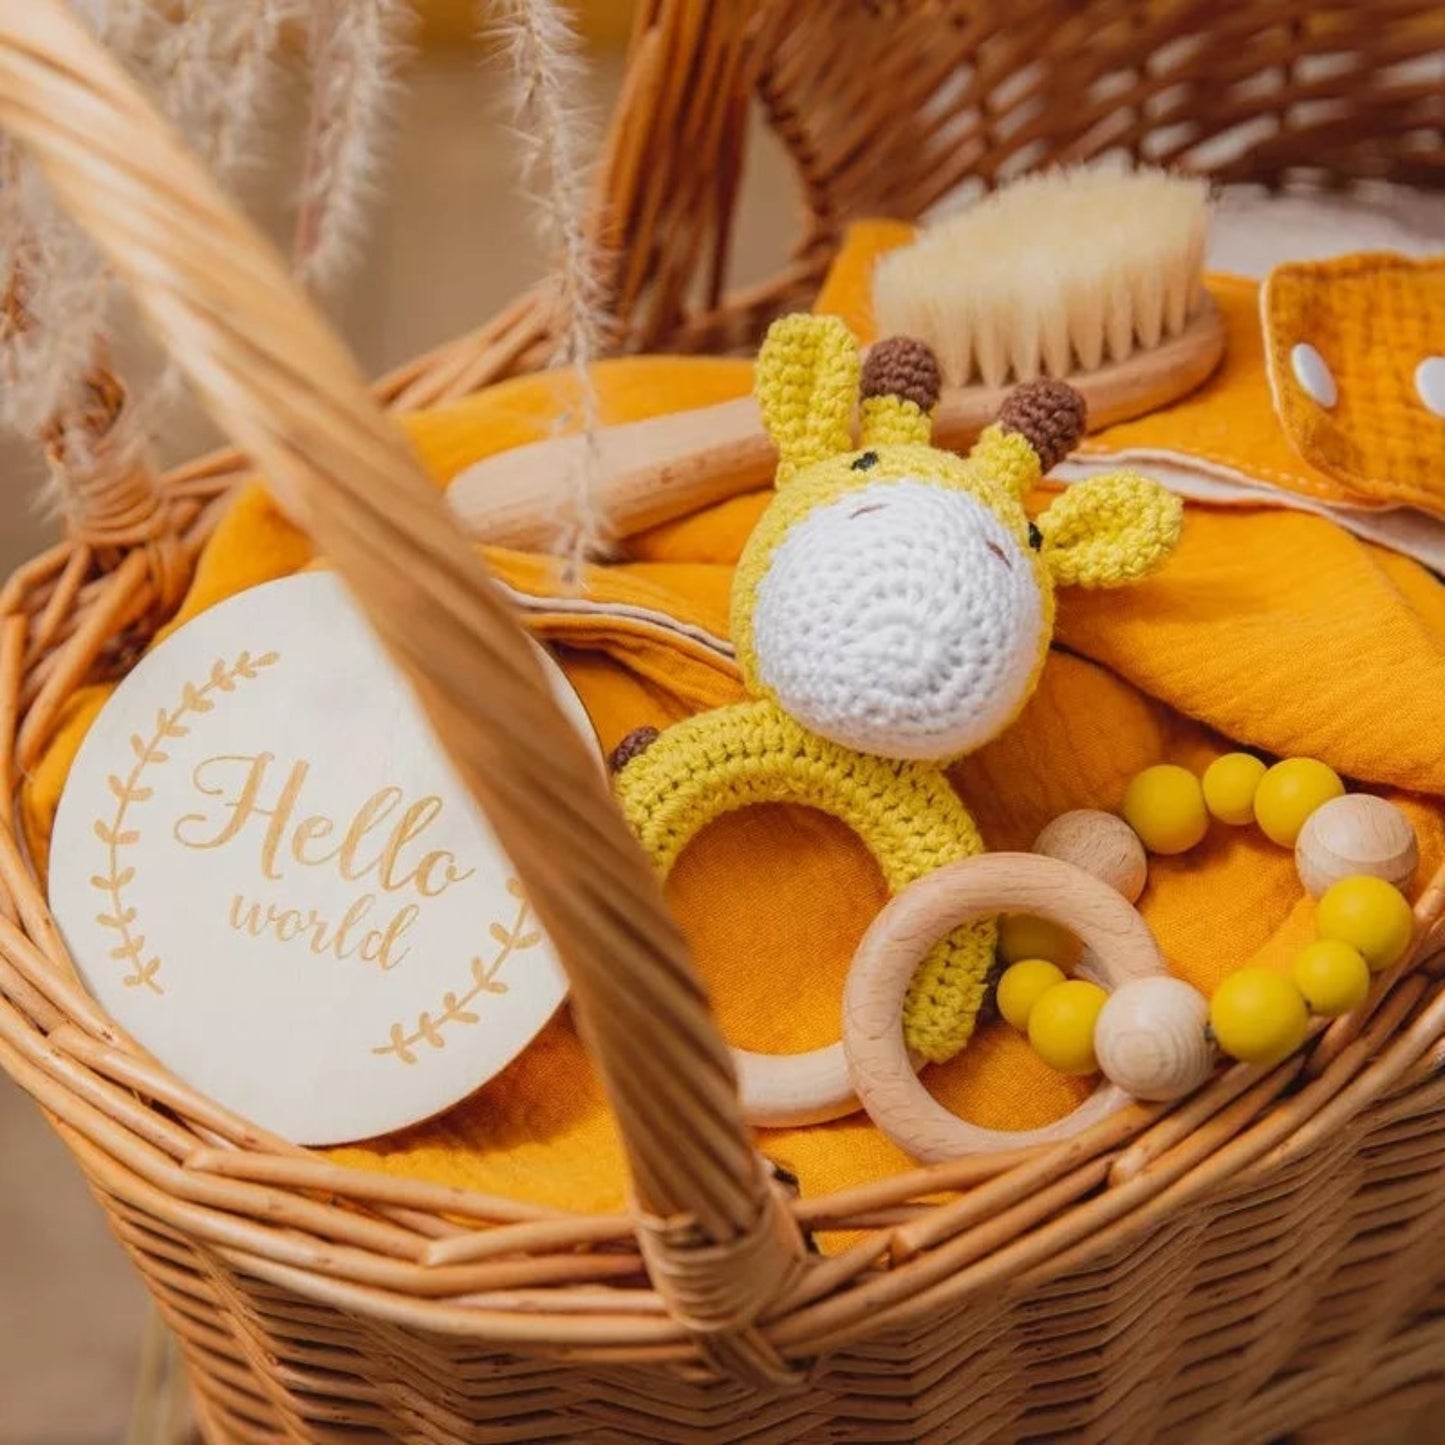 Orange and yellow giraffe baby gift set for newborn and infants with a crochet rattle, a wooden and silicone rattle, a hair brush, a swaddle and a bib in a basket